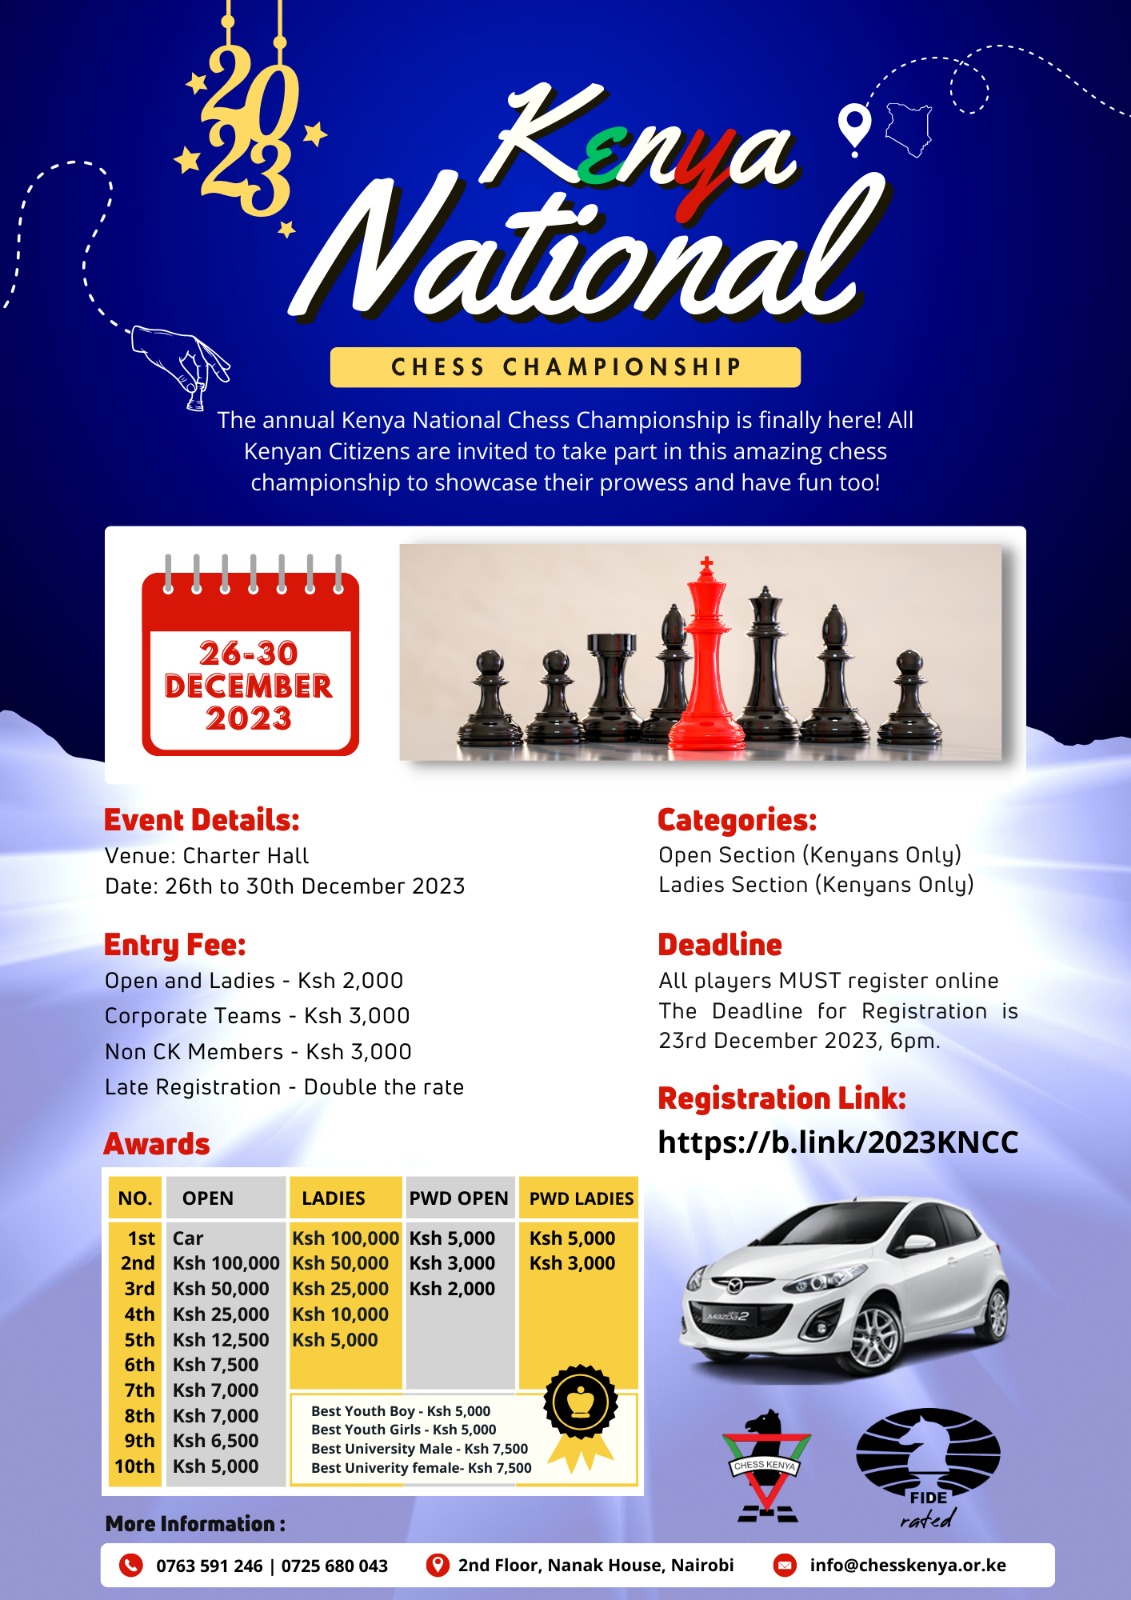 Event poster for the 2023 Kenya National Chess Championship.